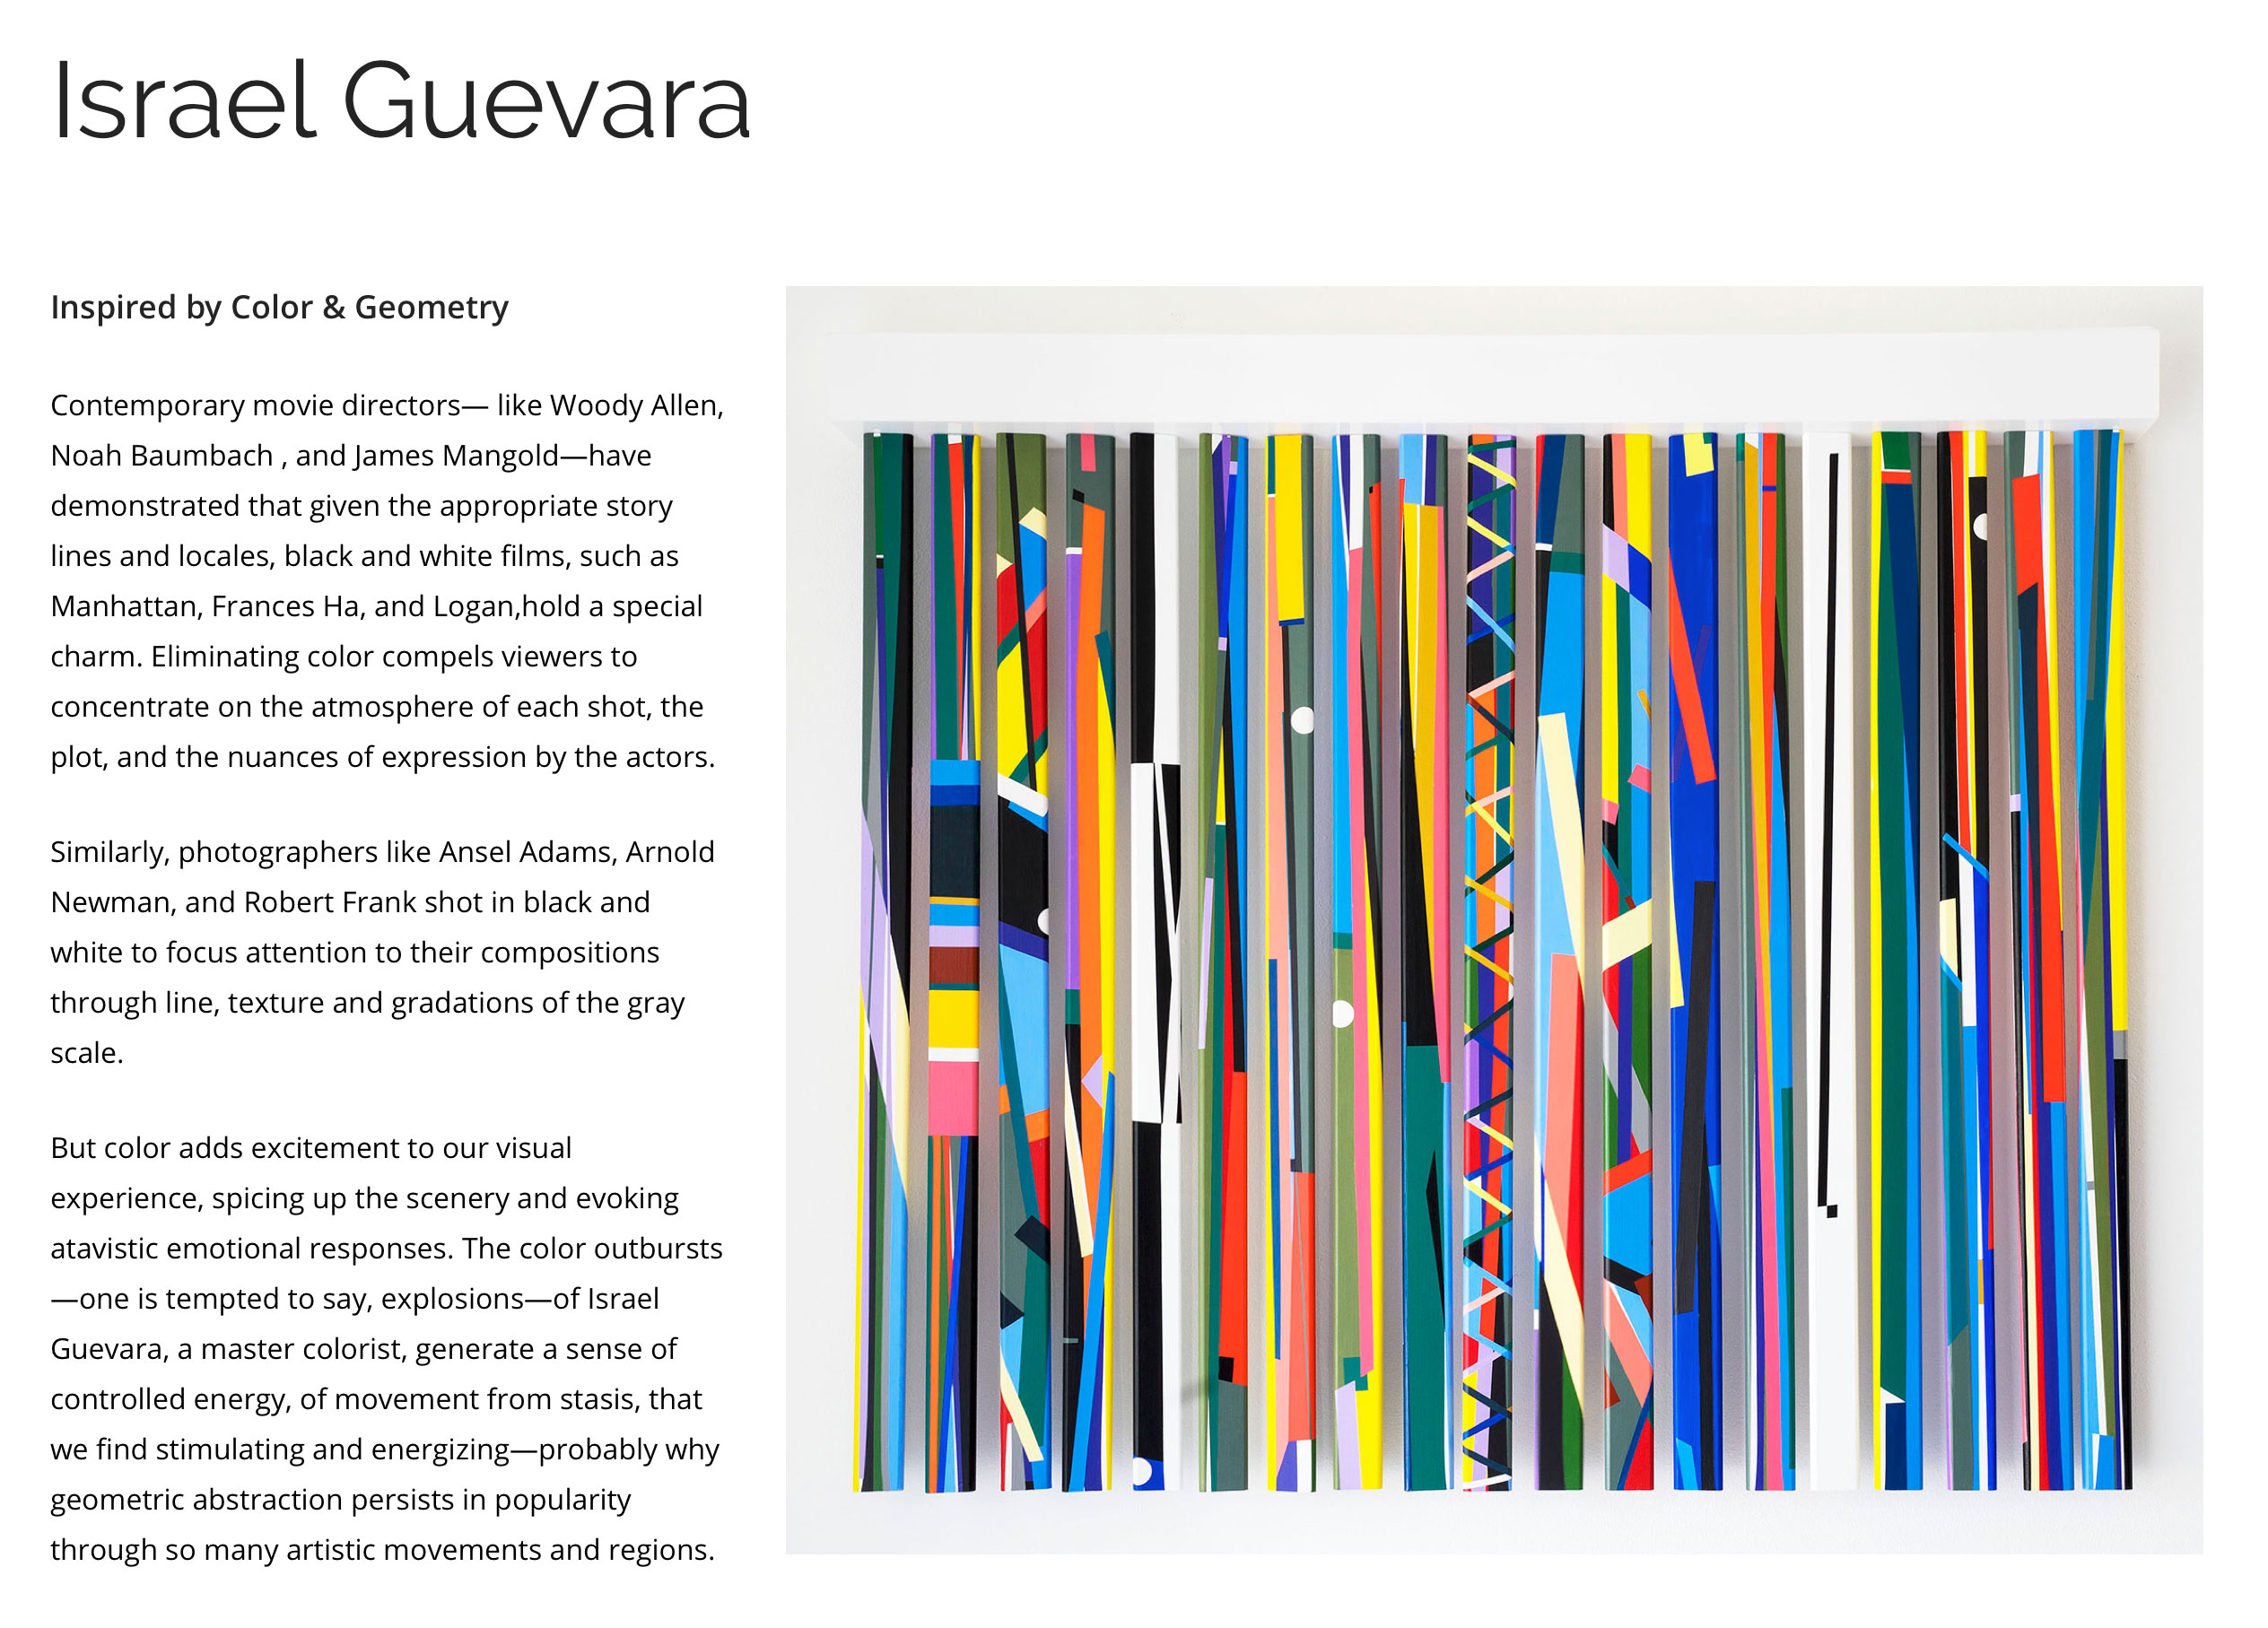 Check out our new artist page for Israel Guevara